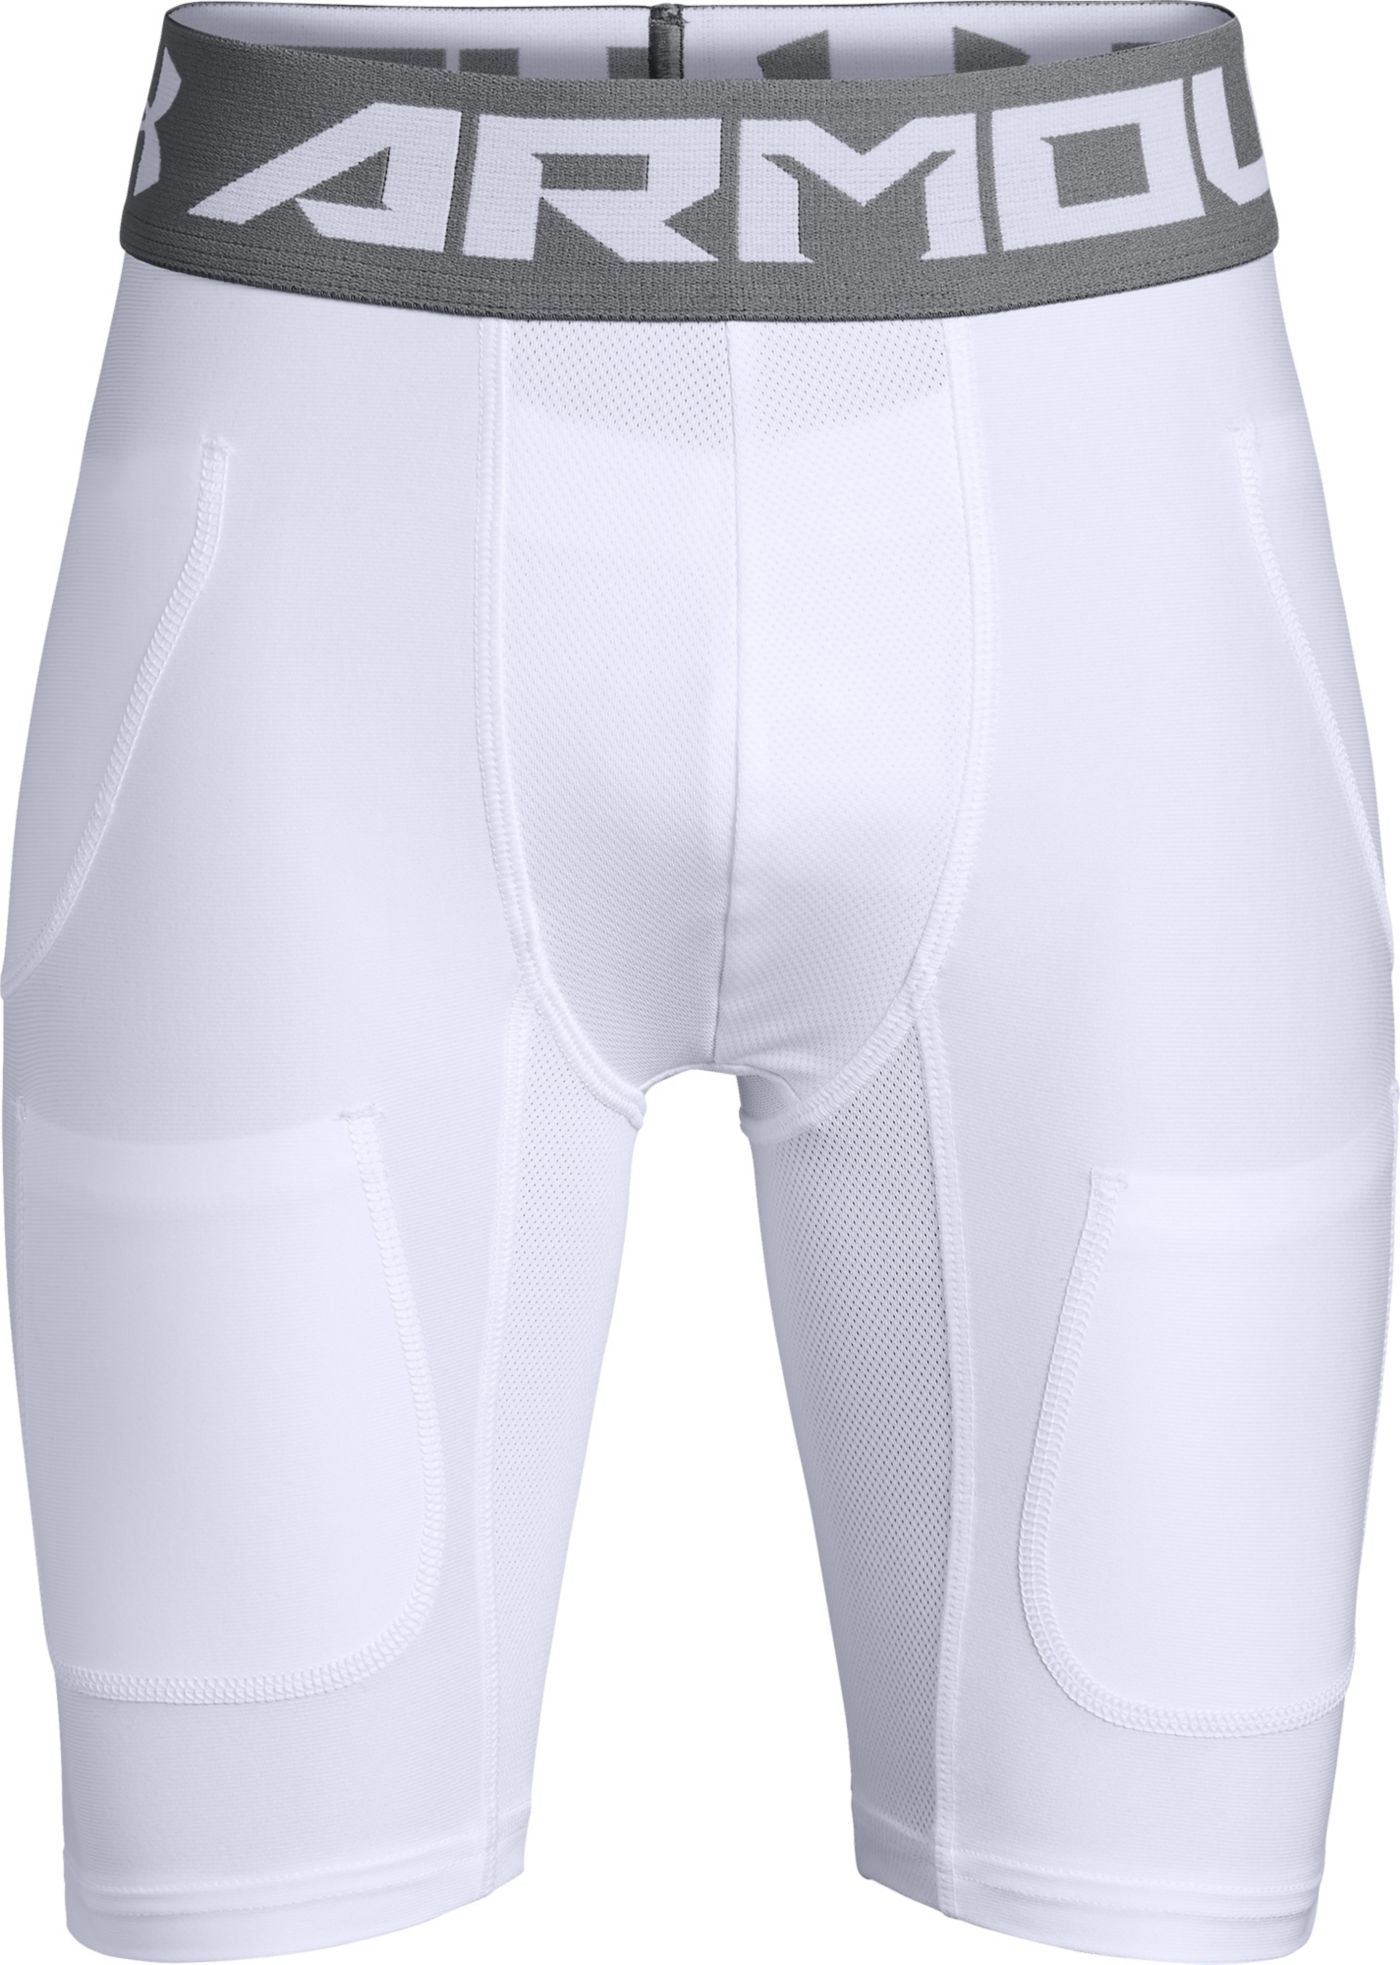 Under Armour Youth Football 6 Pocket Girdle | Midway Sports.